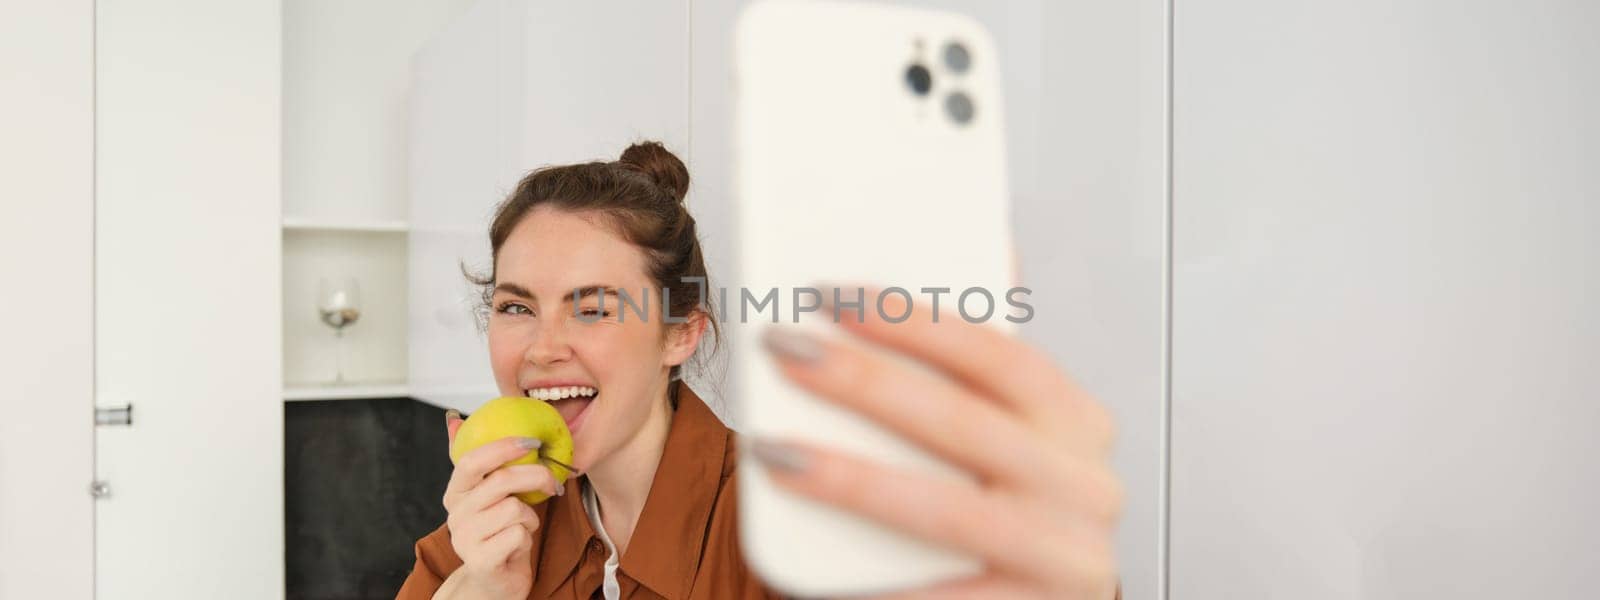 Portrait of happy, smiling young woman records herself, takes selfie while eating an apple in the kitchen, using smartphone app, makes photos with mobile phone.